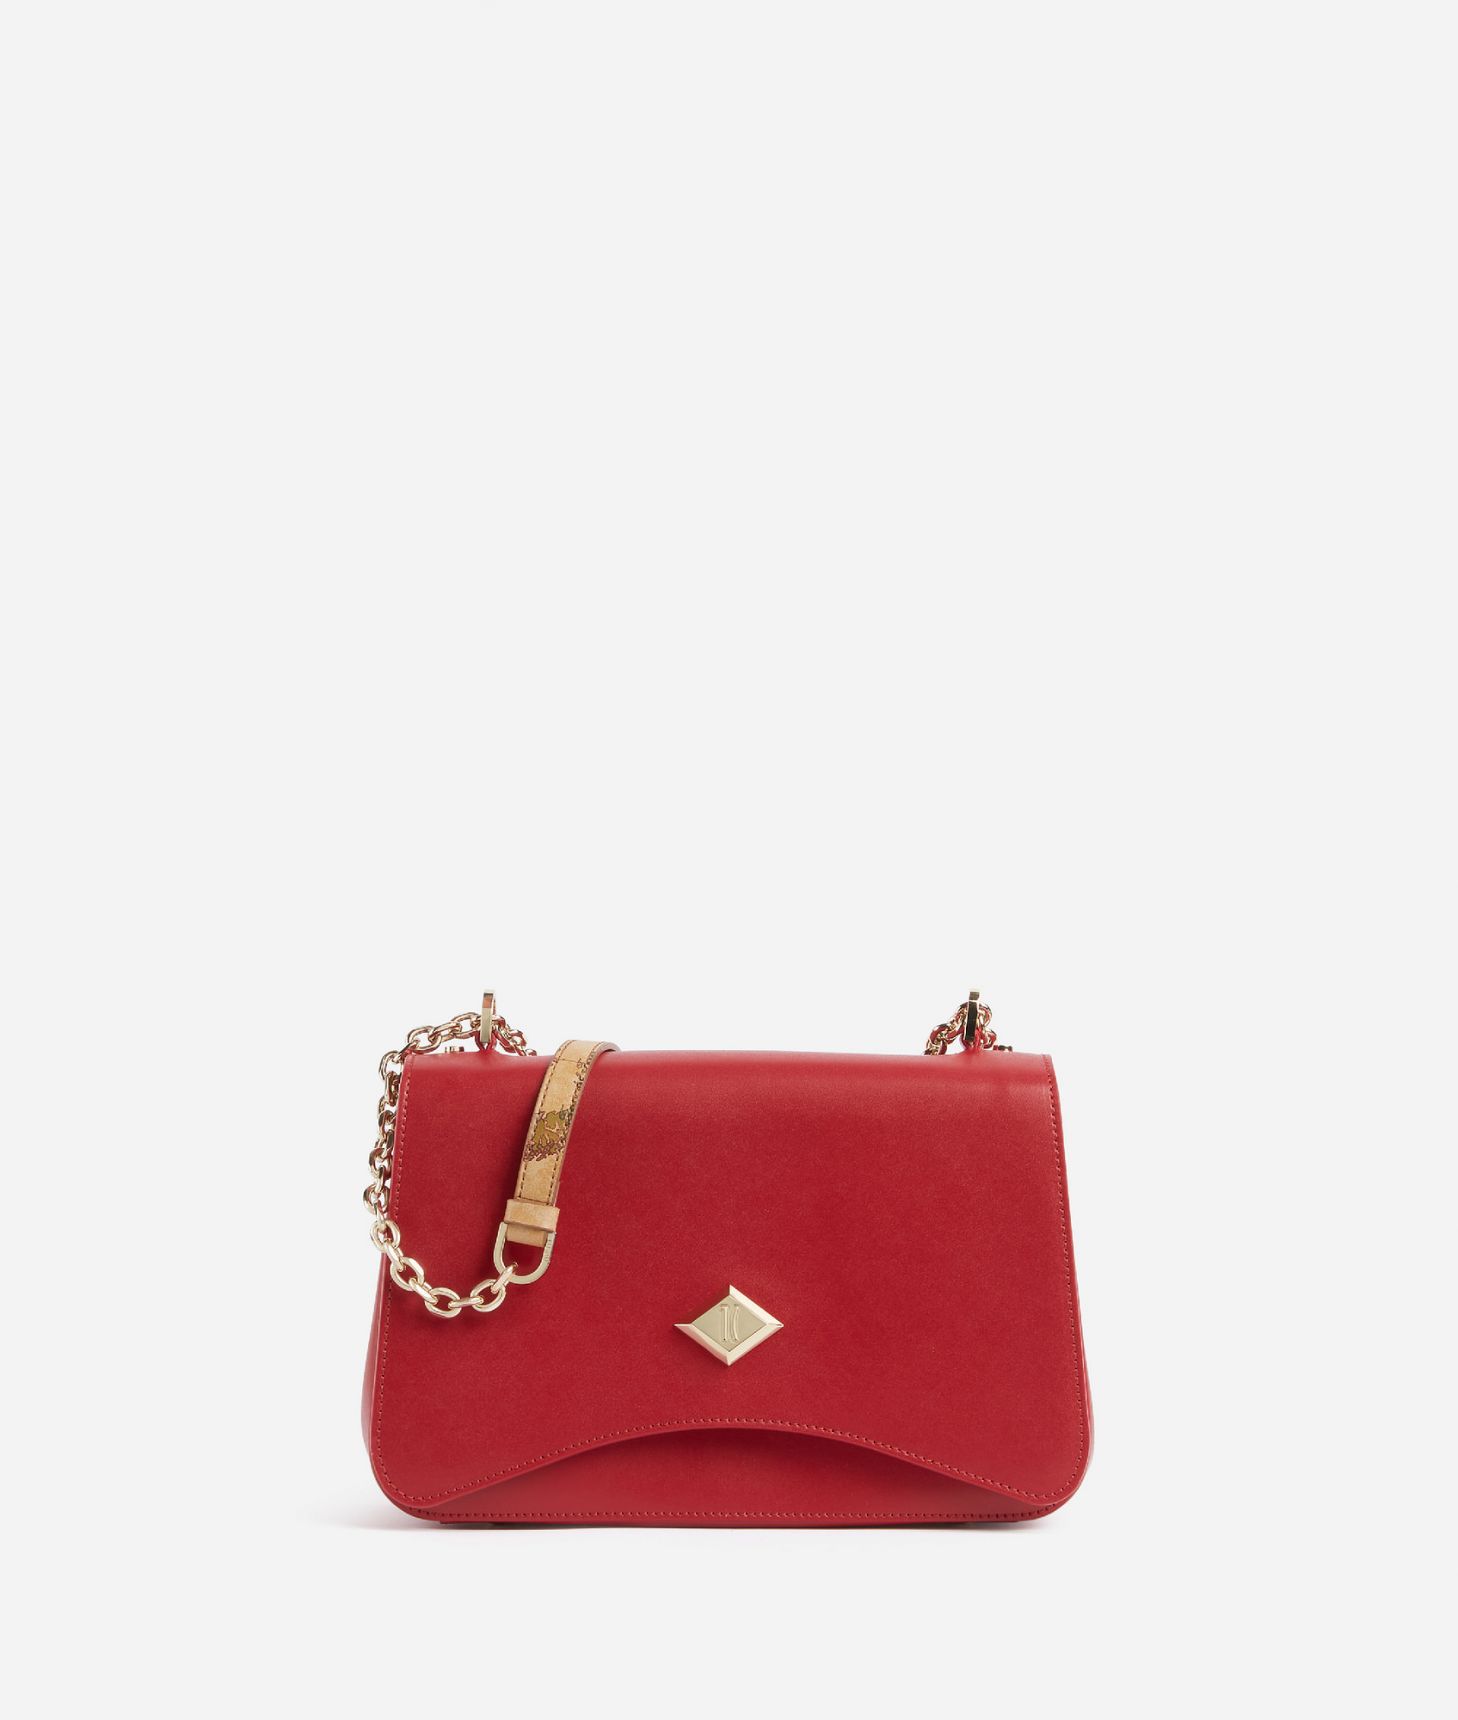 Spicy Bag crossbody bag Scarlet Red,front